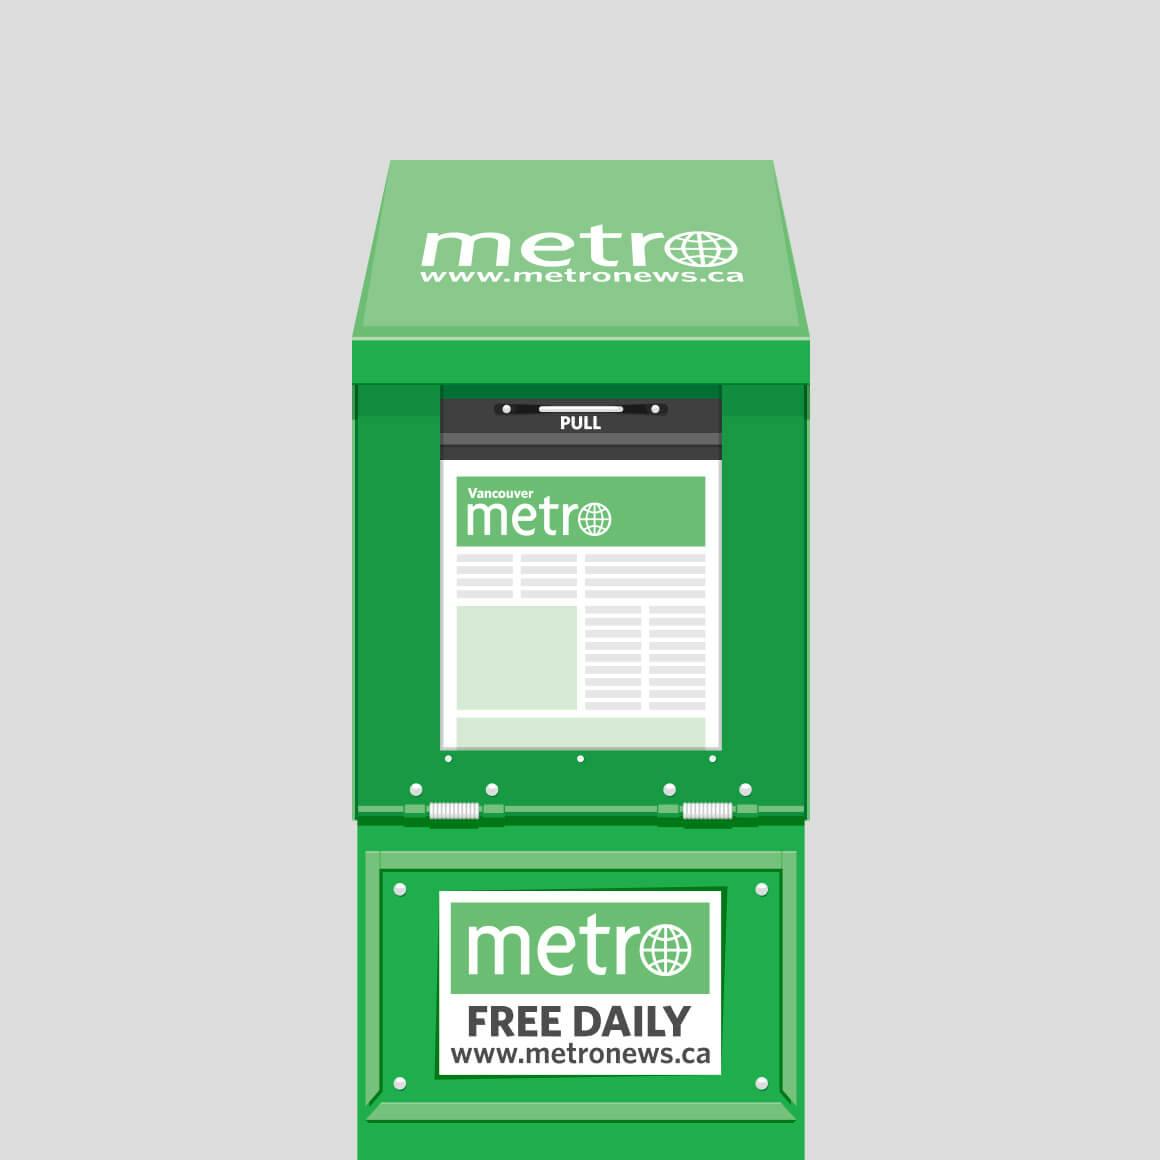 Illustration of a conceptual physical newspaper stand for Vancouvers digital news publication Metro.